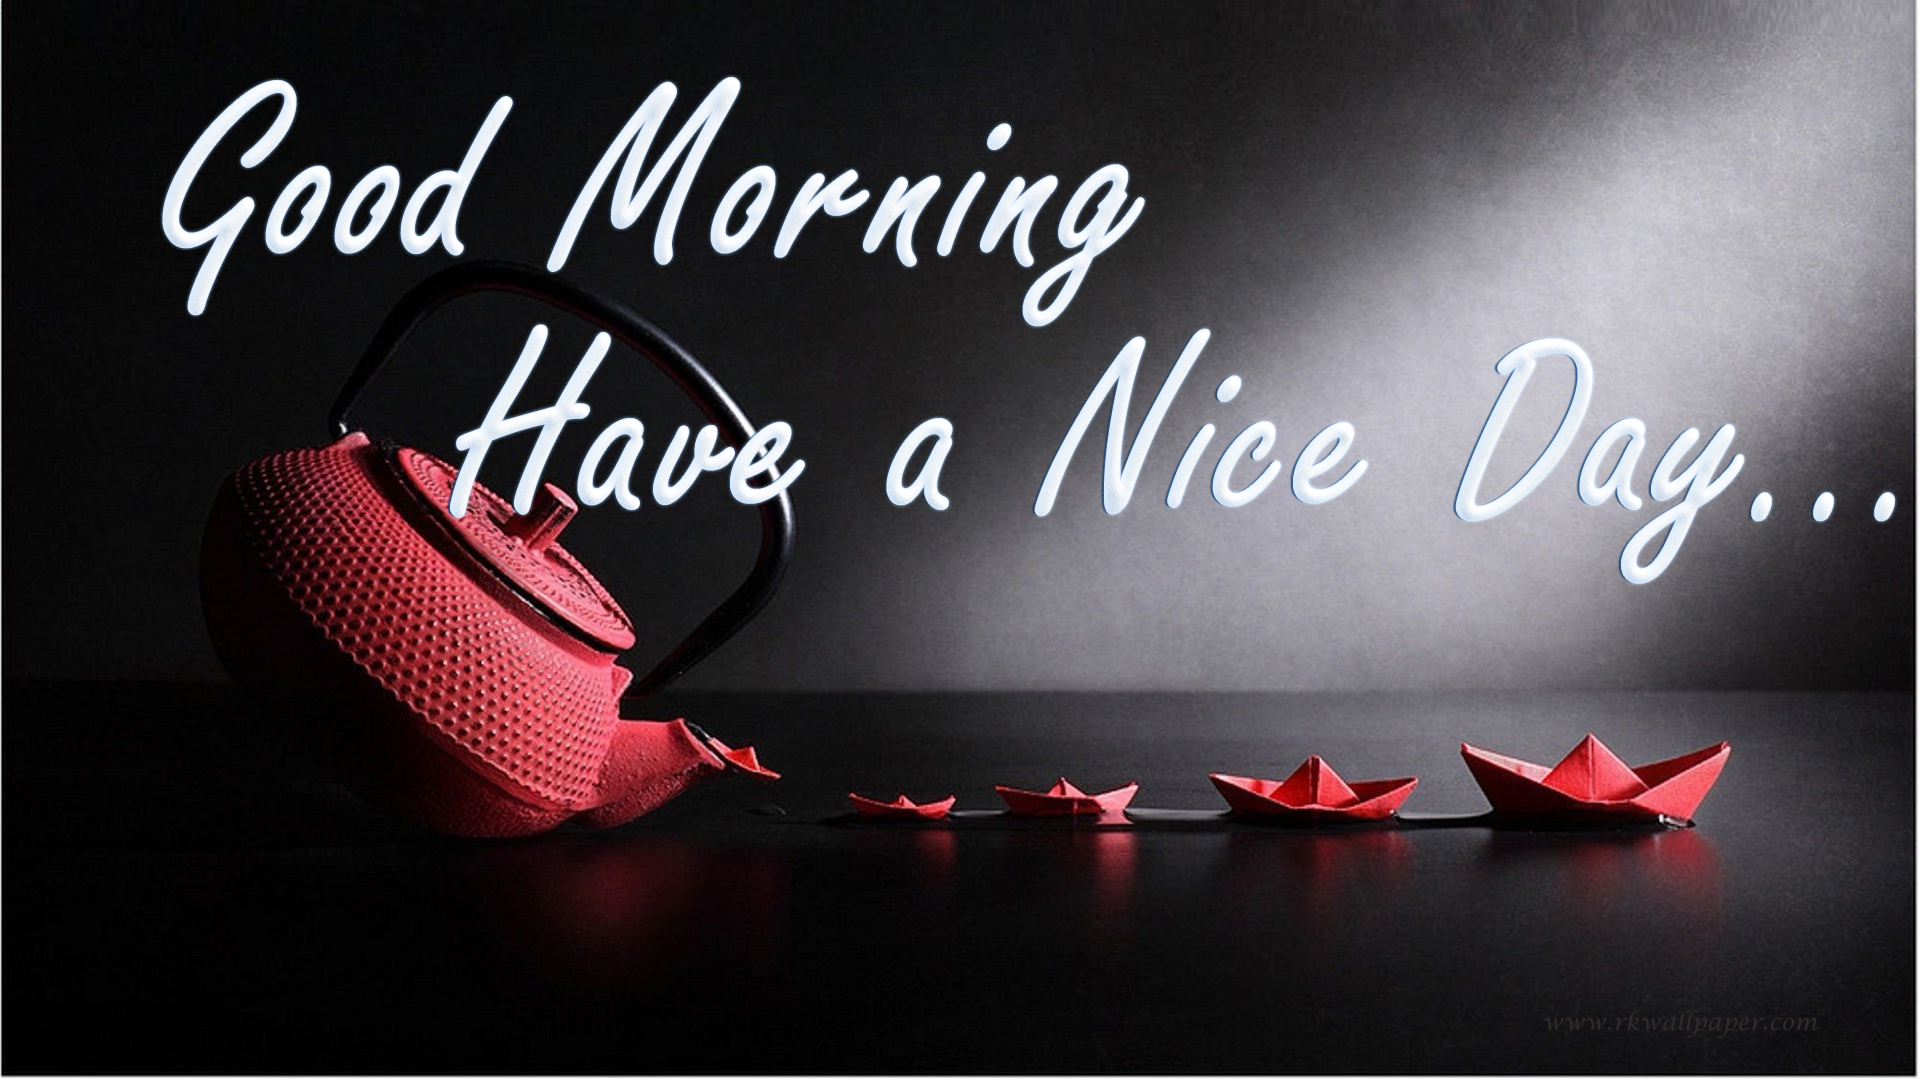 Good Morning Have A Nice Day Wishes Wallpaper Quotes And